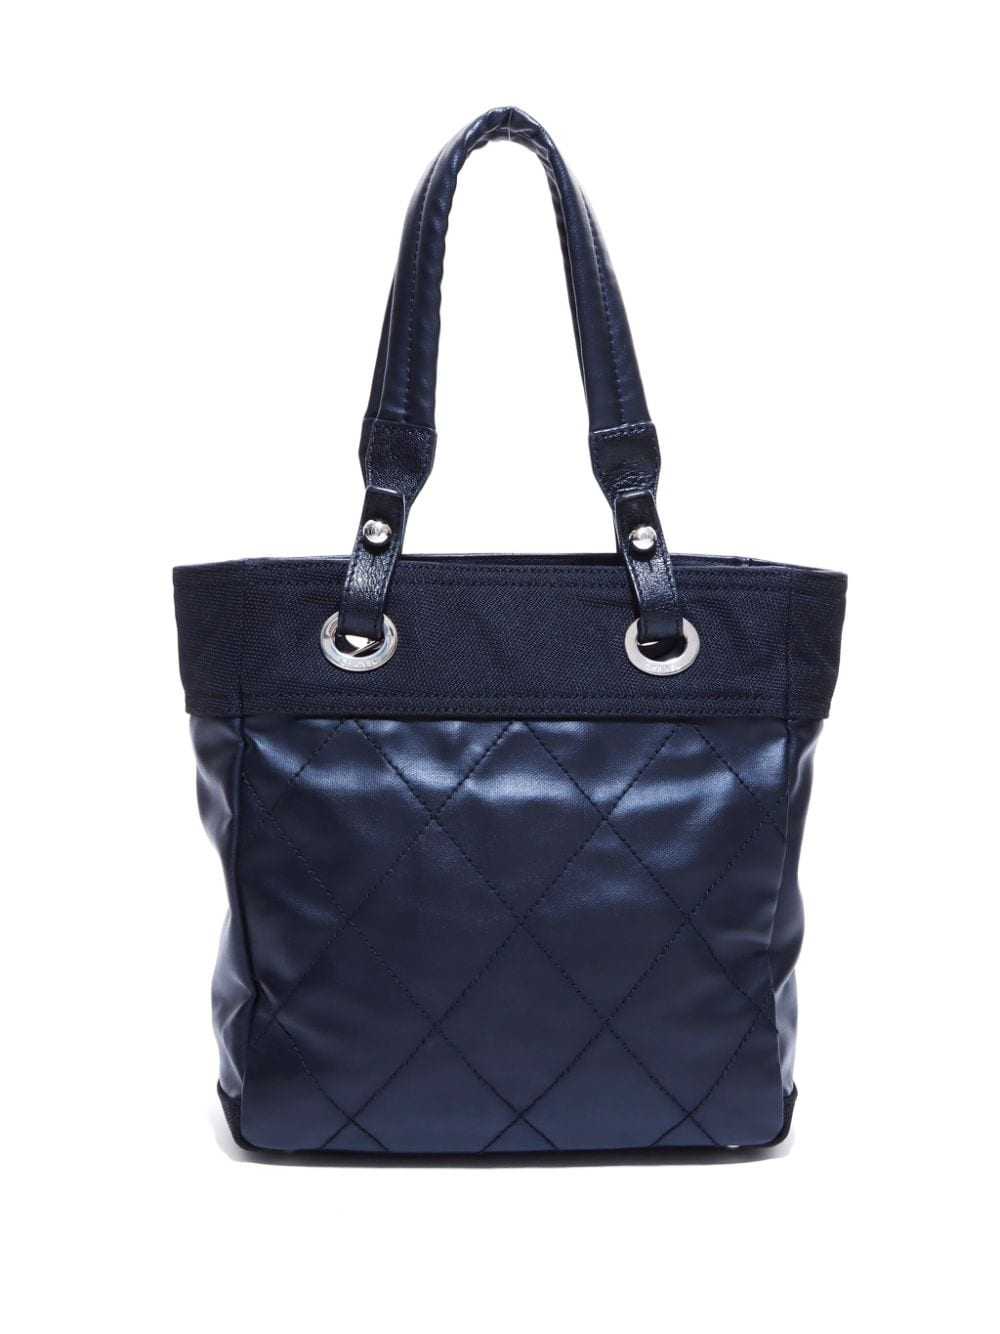 CHANEL Pre-Owned 2007-2008 Paris Biarritz PM tote… - image 2